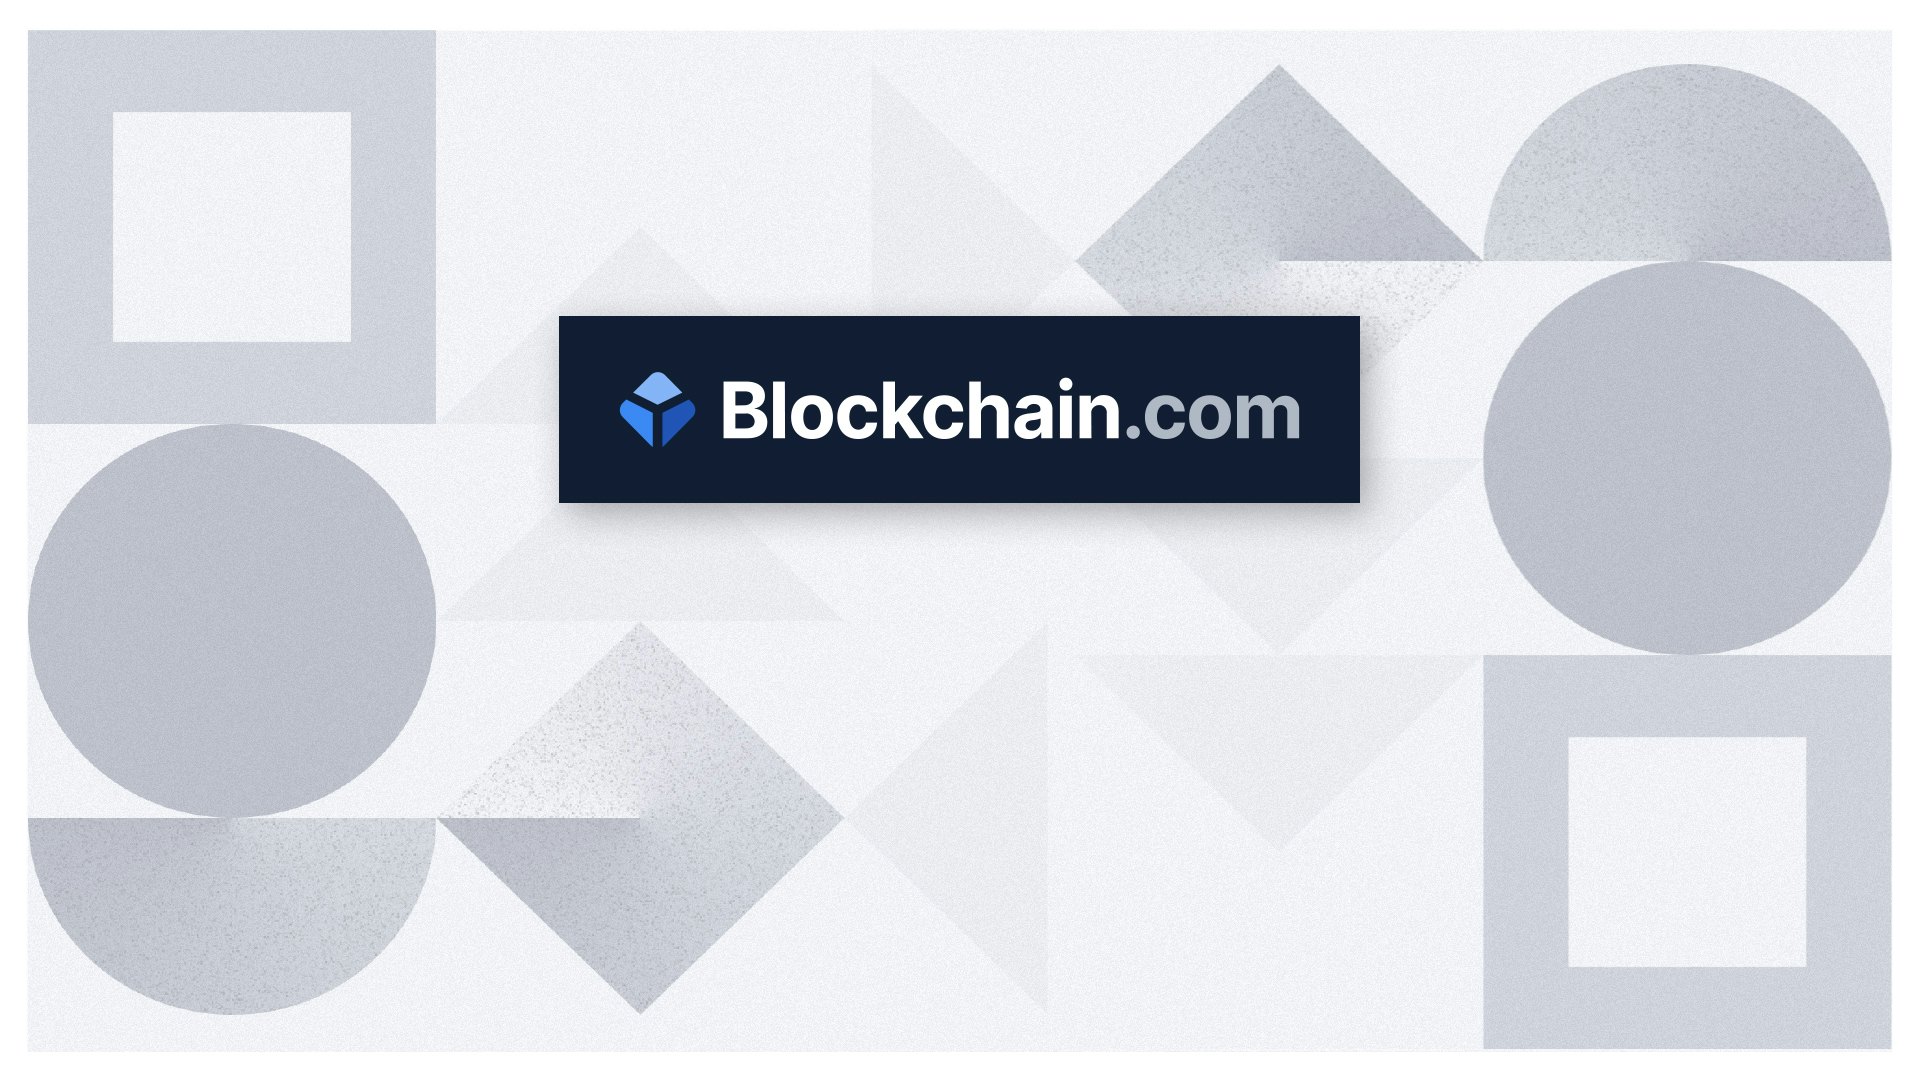 A featured image with Blockchain.com's logo, used for the case study with the company. 